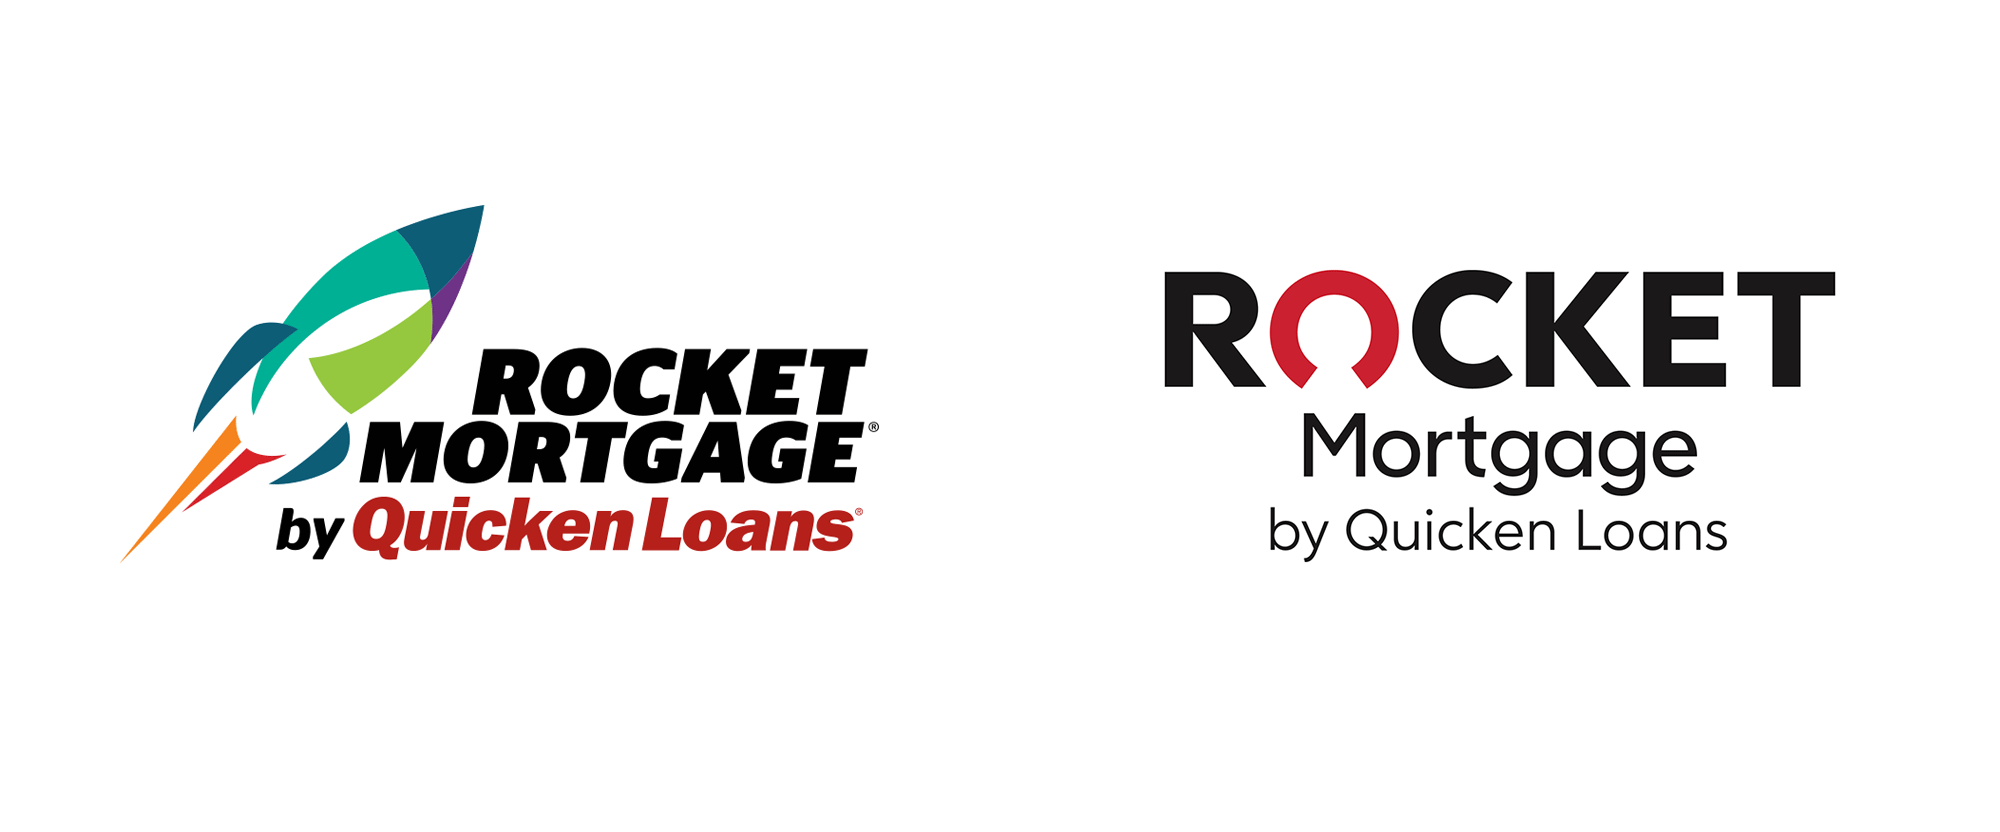 Quicken Mortgage Logo - Brand New: New Logo and Identity for Rocket Mortgage